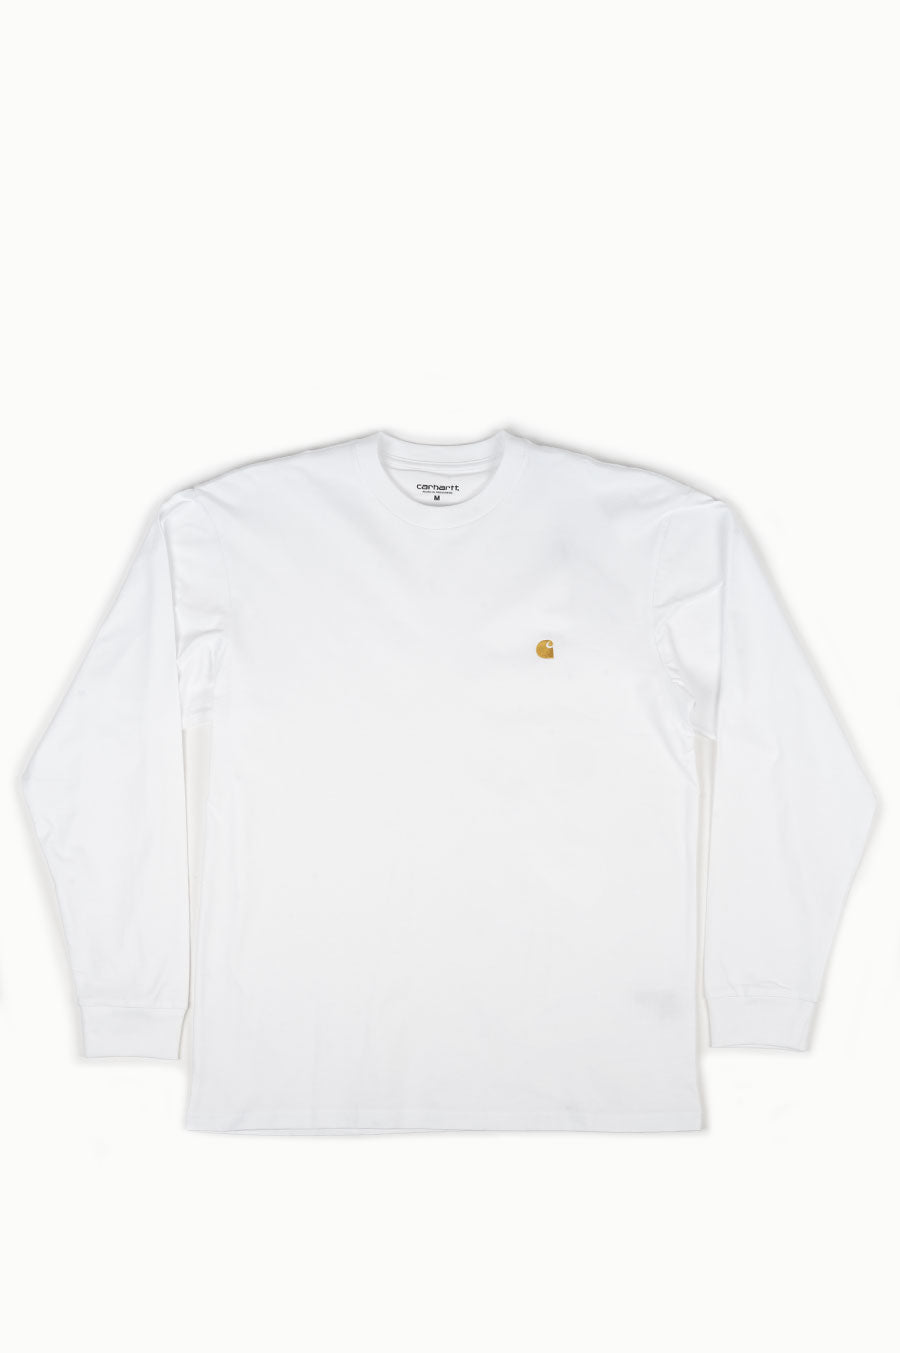 CARHARTT WIP CHASE L/S T-SHIRT WHITE